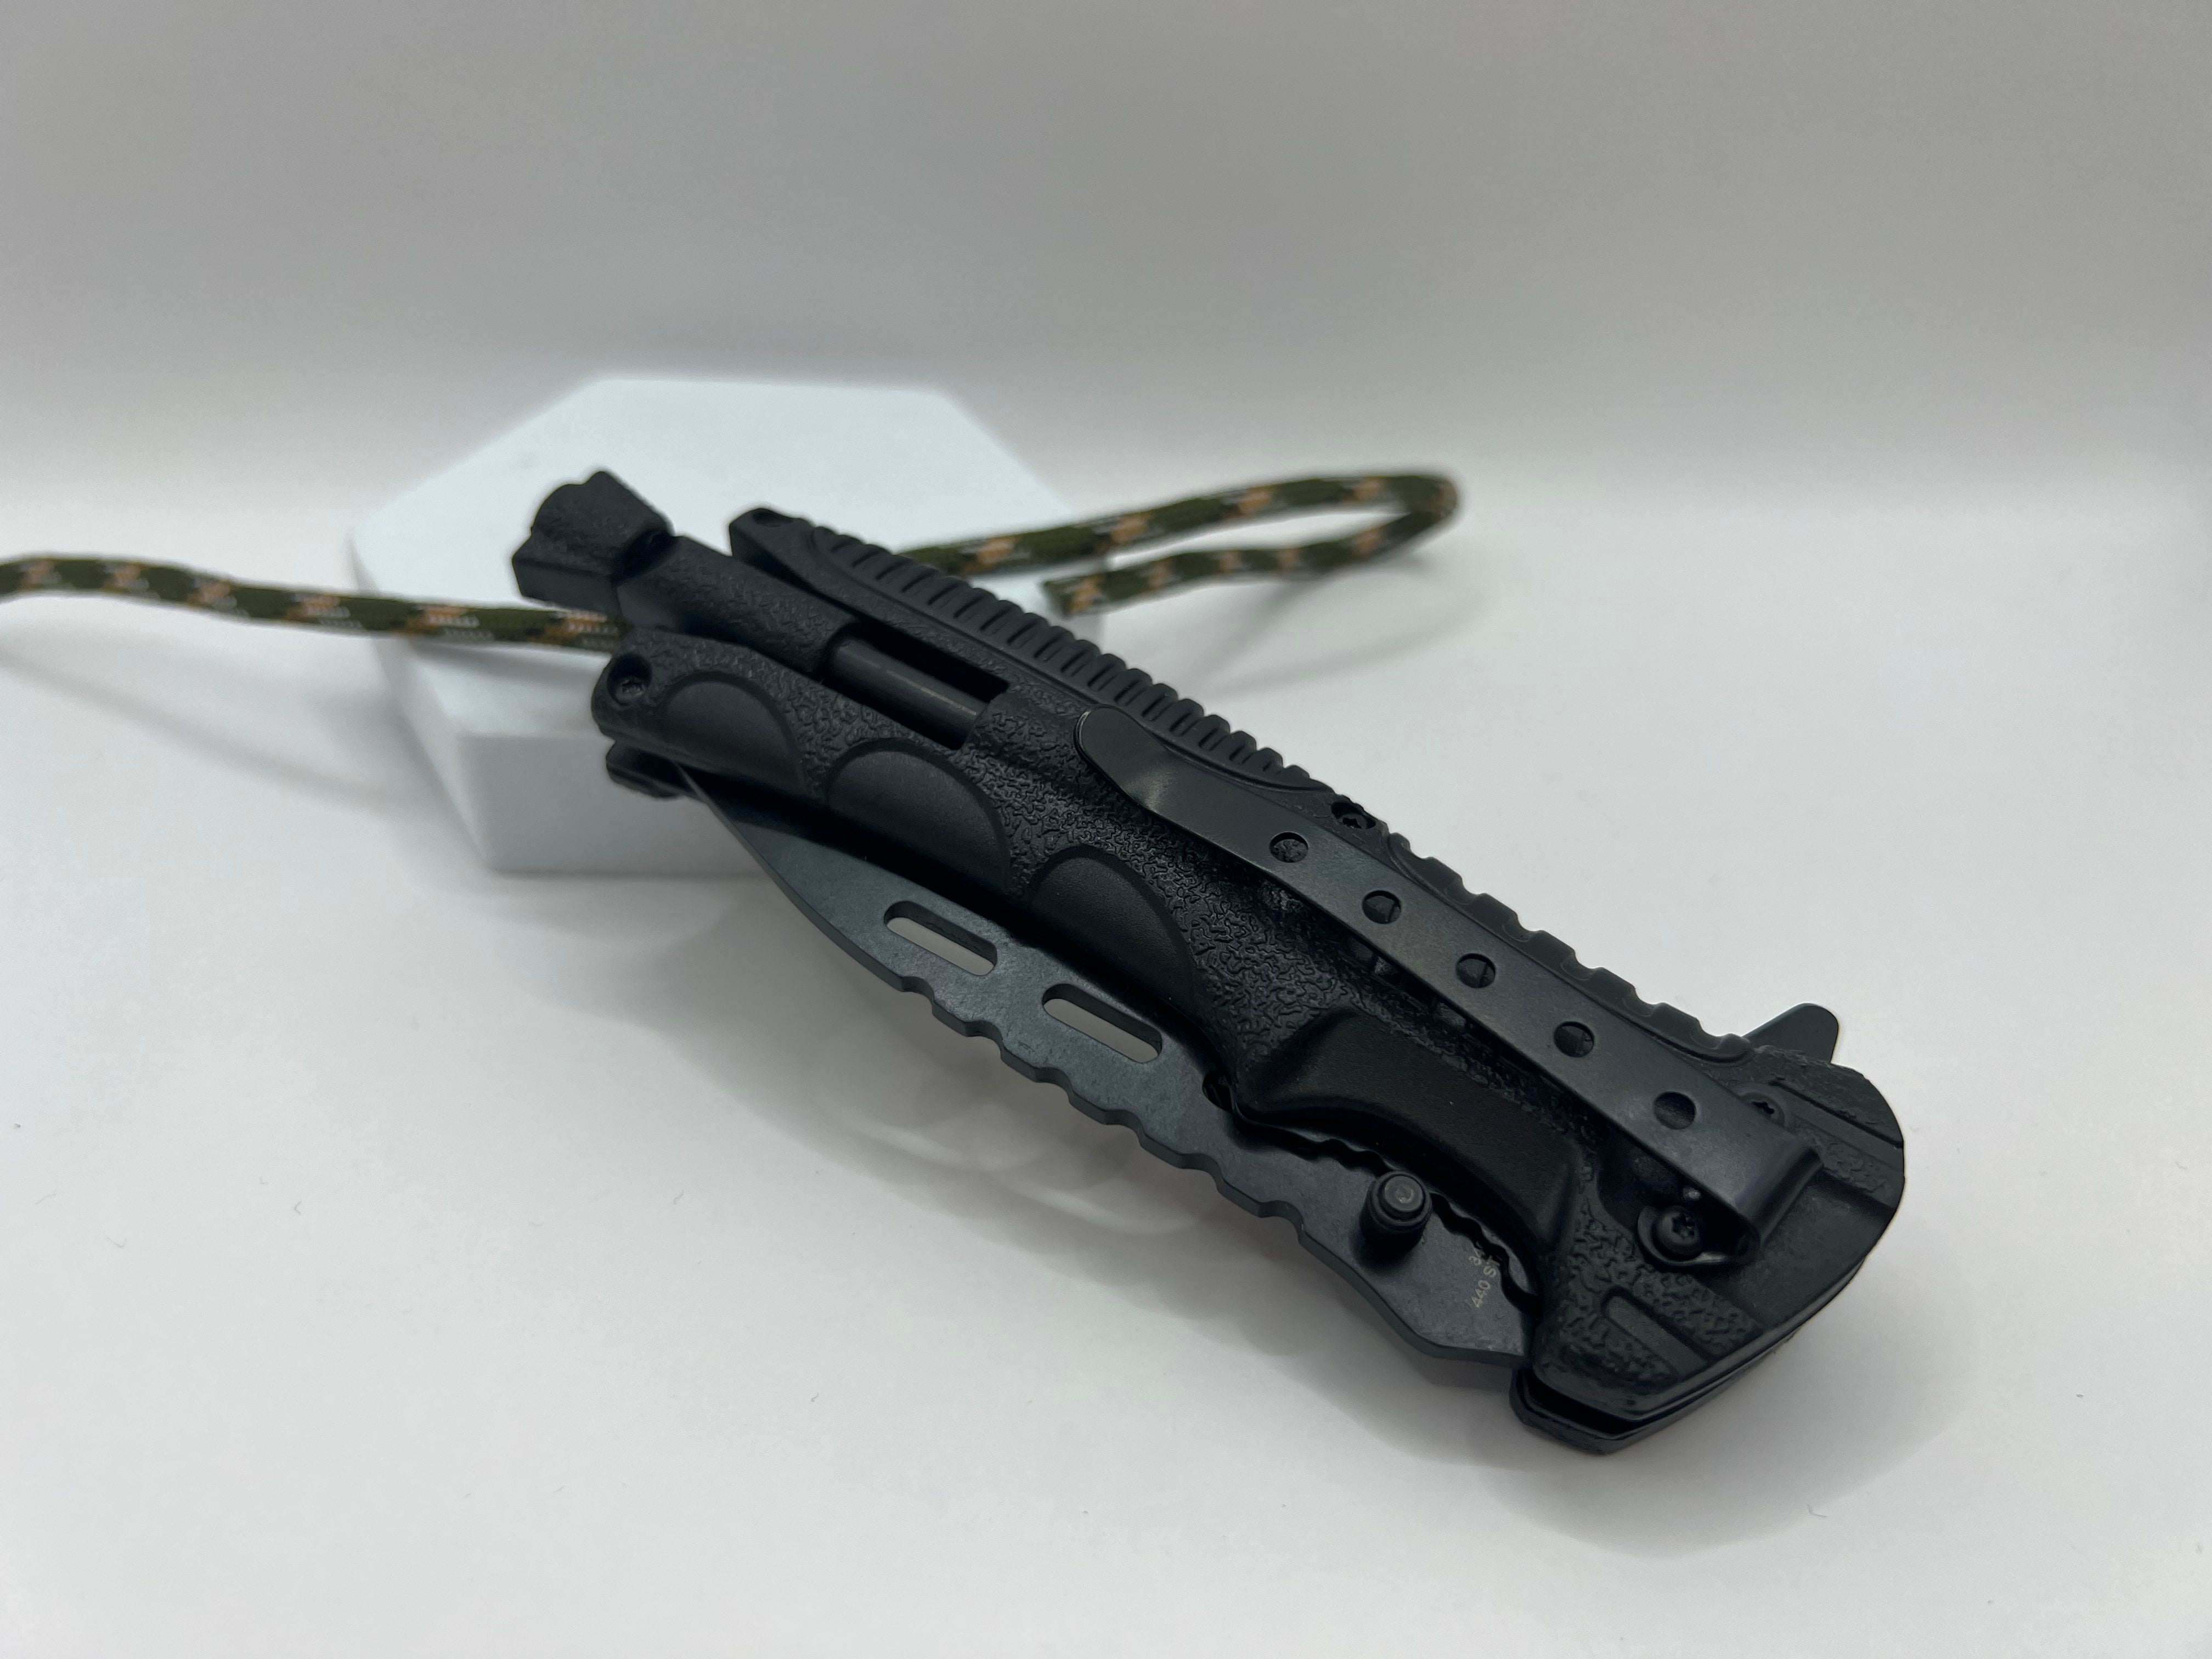 Tactical camo one-hand knife with fire starter and clip